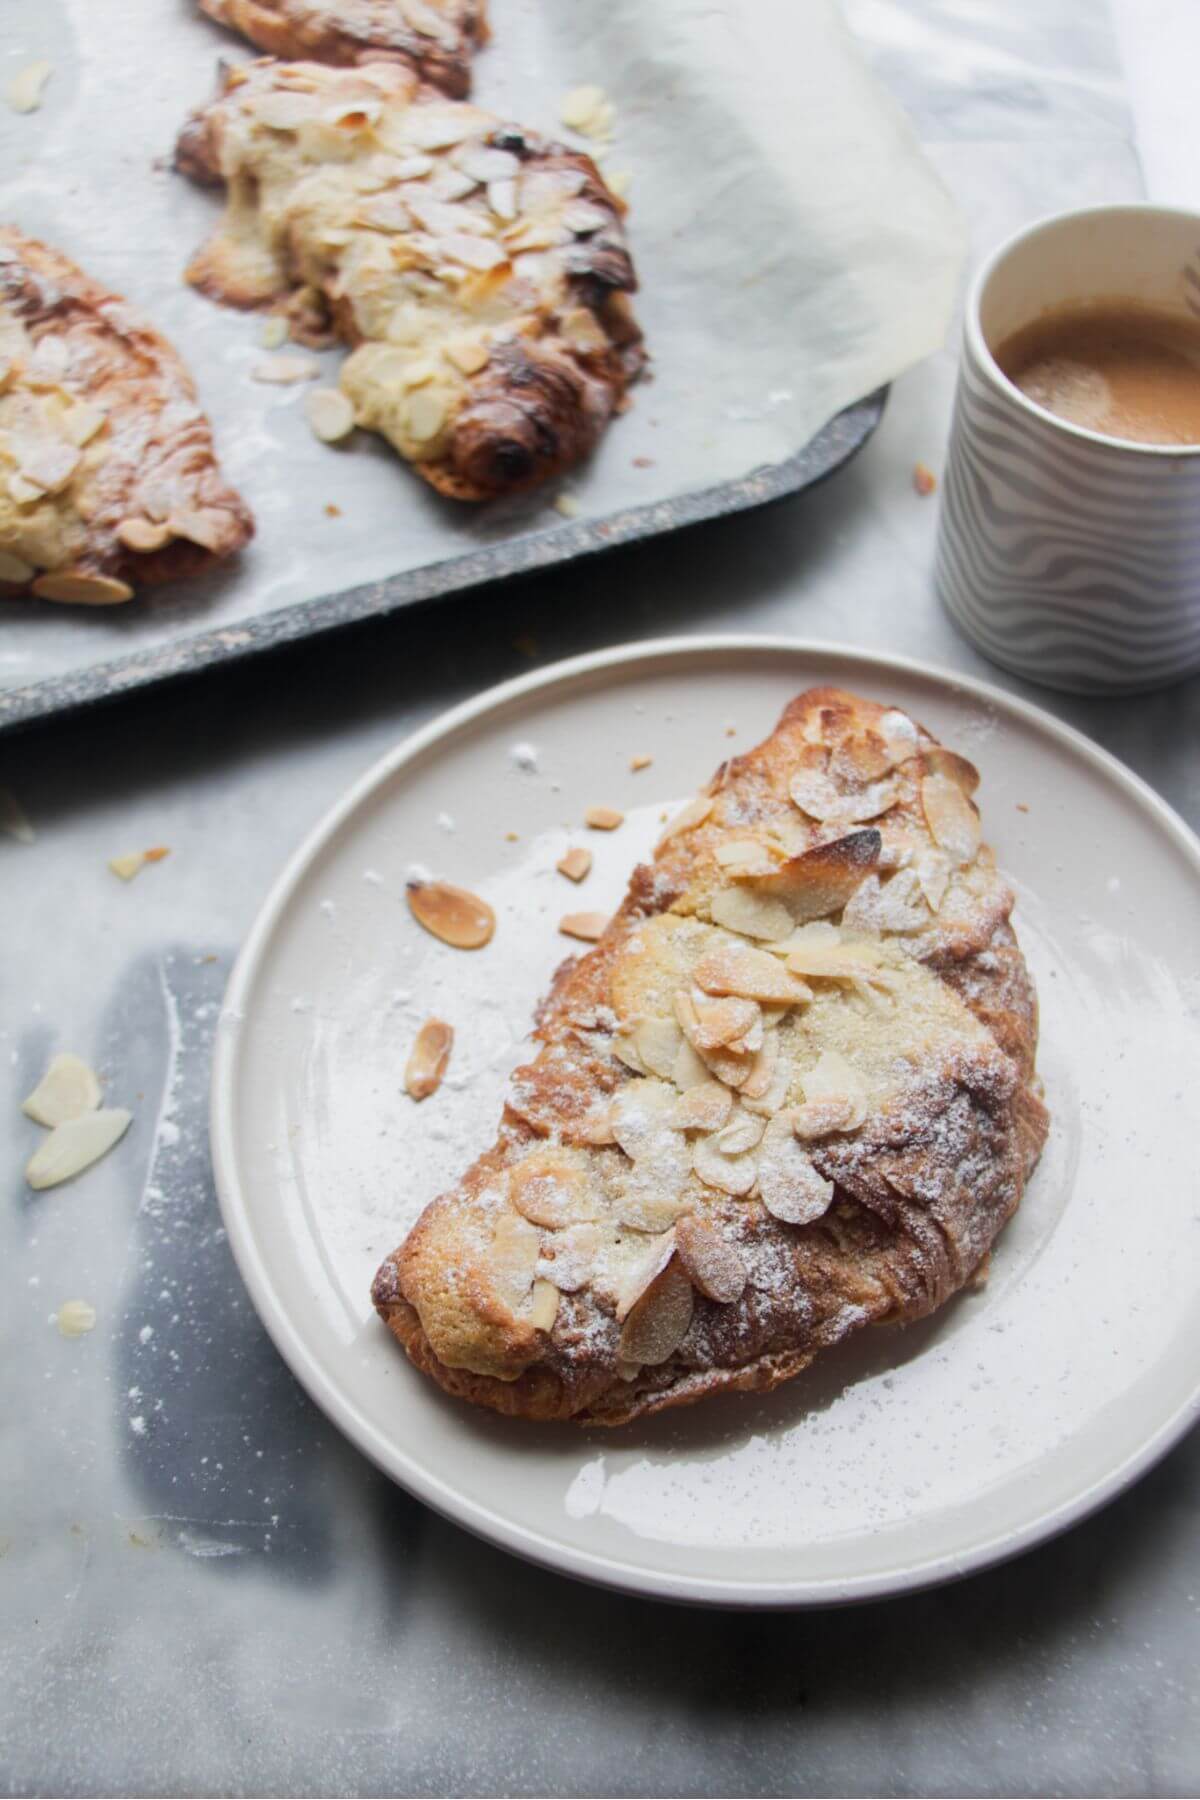 An almond croissant on a small white plate with a tray of almond croissants in the background.